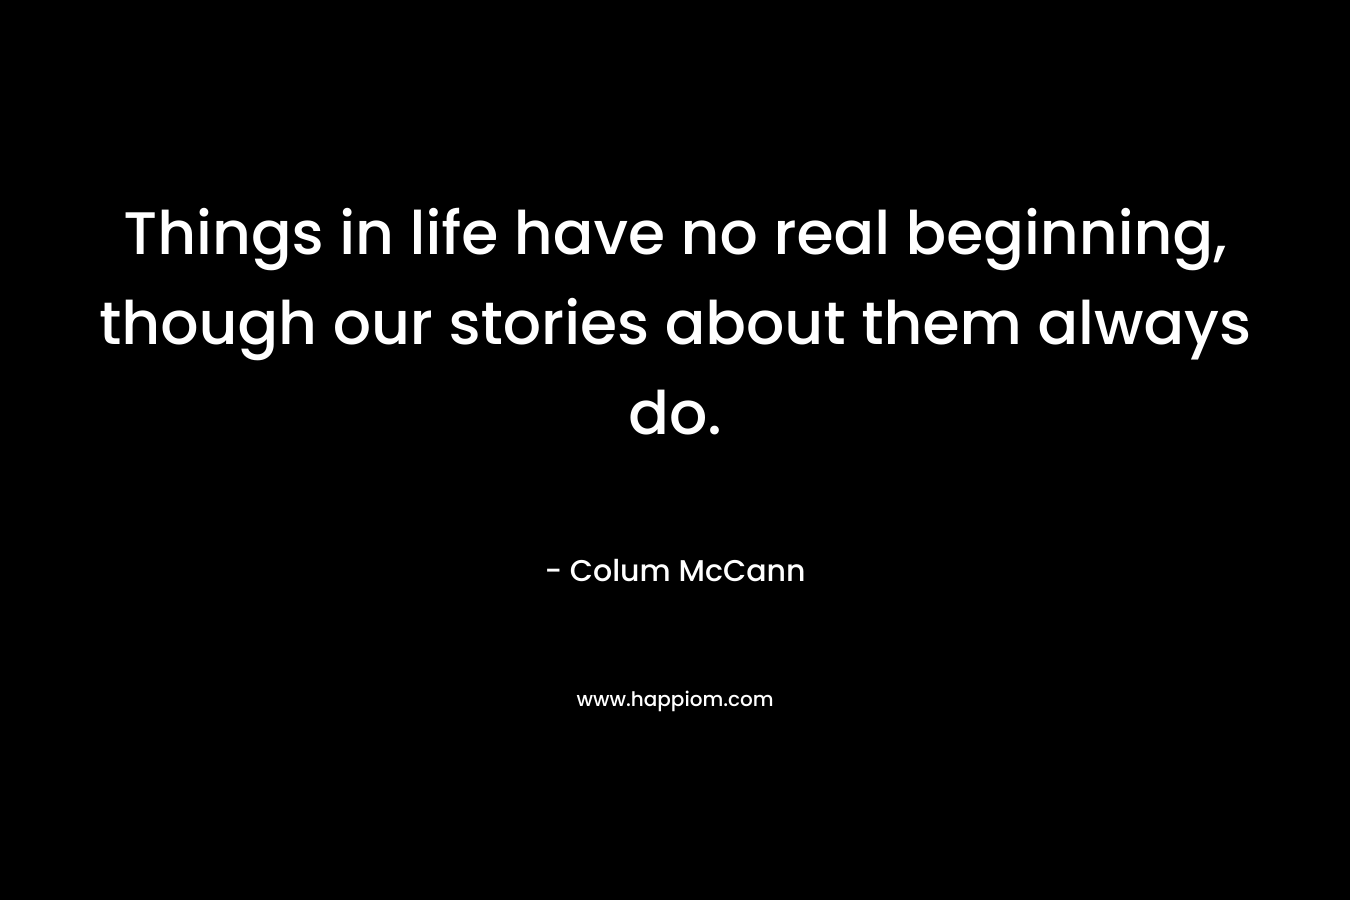 Things in life have no real beginning, though our stories about them always do. – Colum McCann